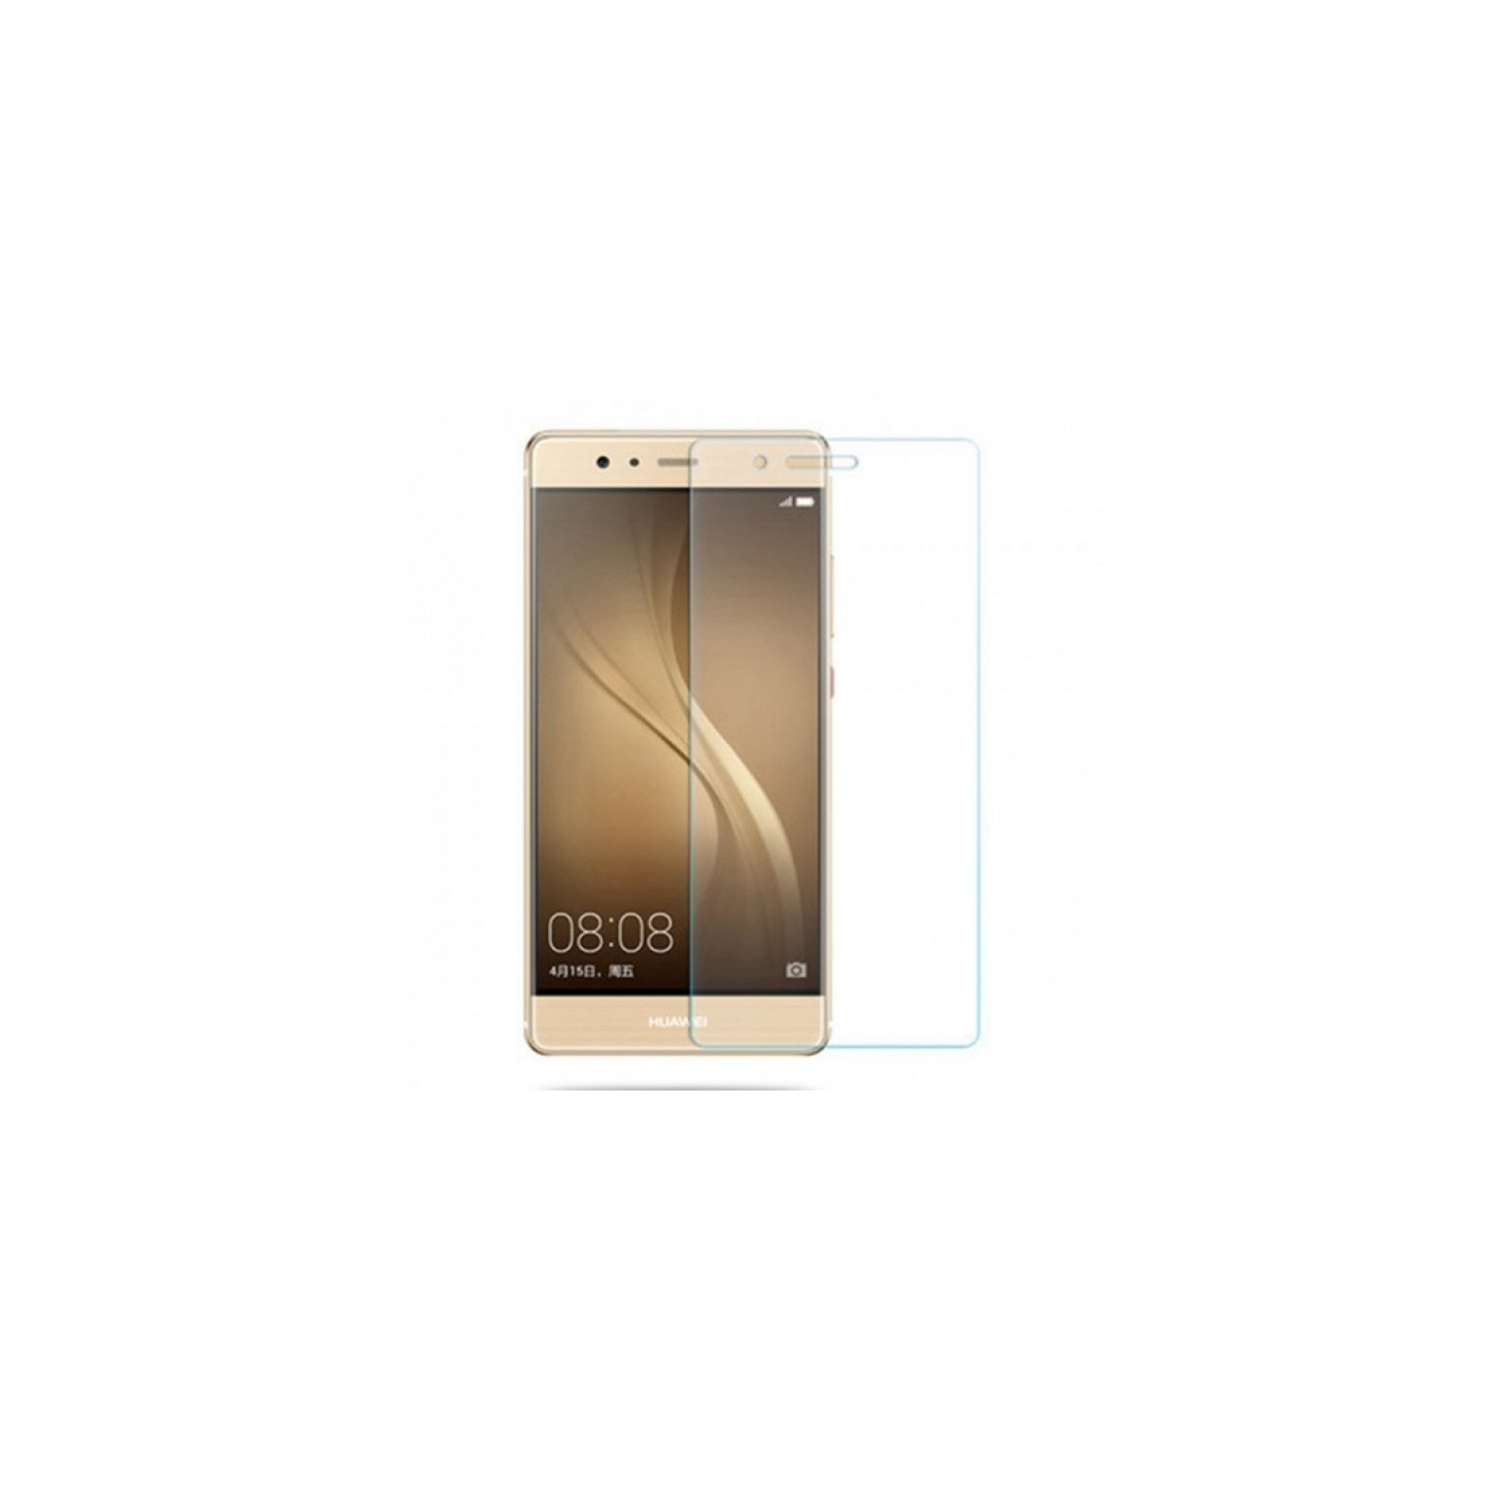 【2 Packs】 CSmart Premium Tempered Glass Screen Protector for Huawei Mate 8, Case Friendly & Bubble Free